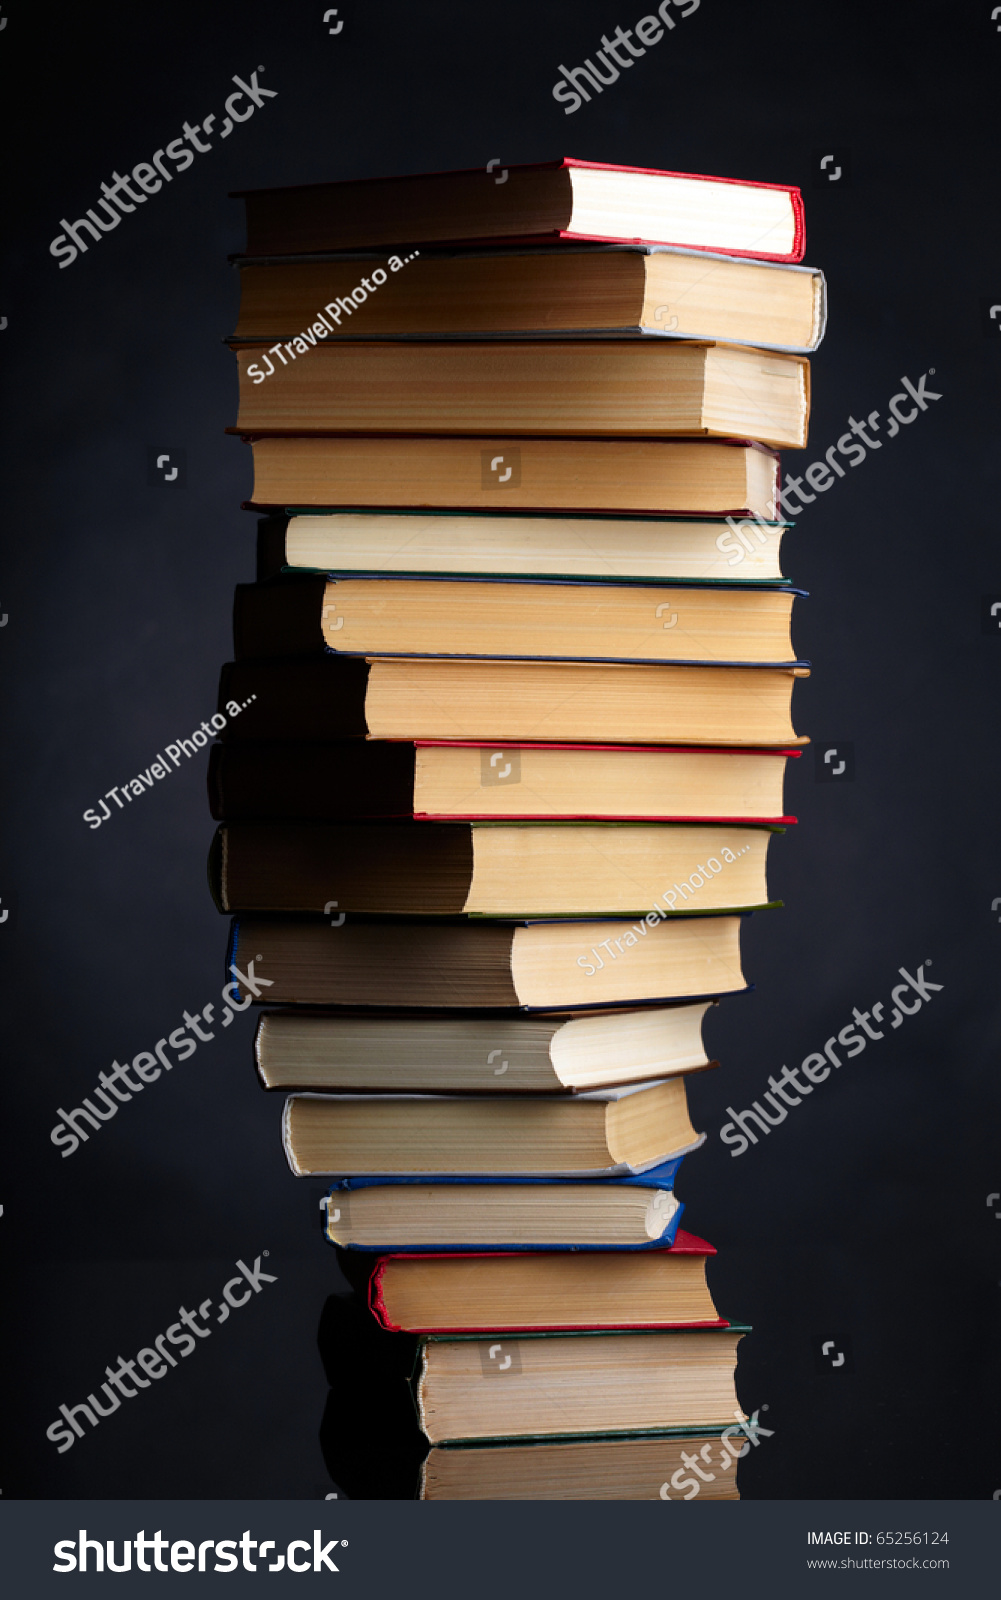 Pile Of Books On A Black Background Stock Photo 65256124 : Shutterstock